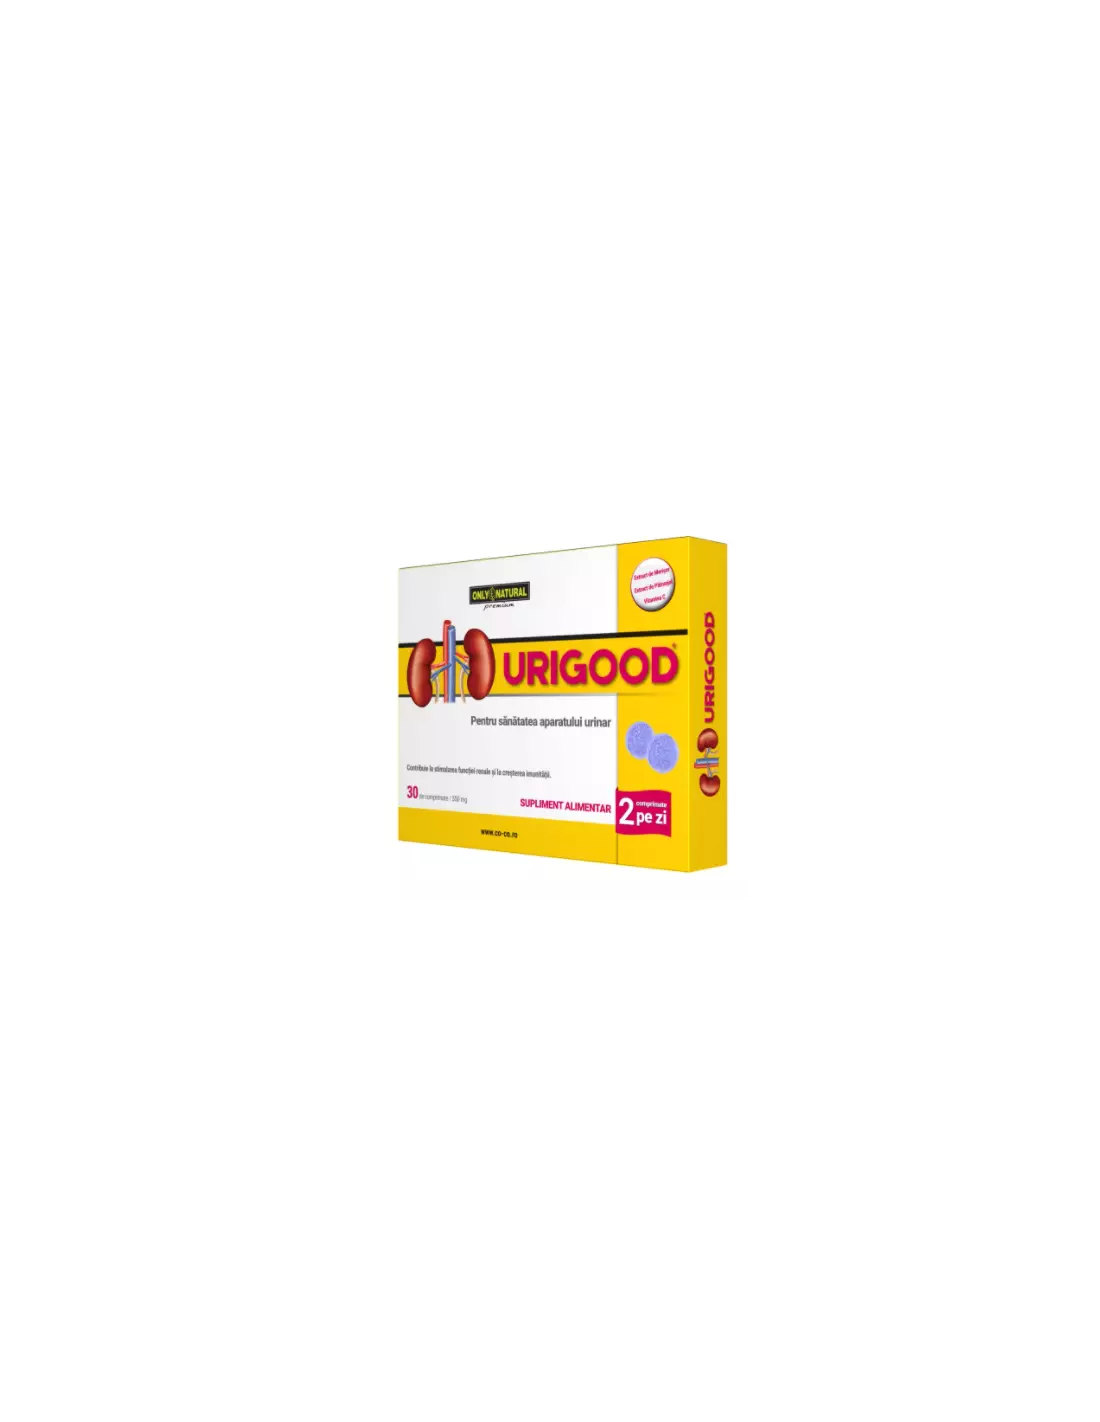 Urigood, 30 comprimate, Only Natural - INFECTII-URINARE - ONLY NATURAL